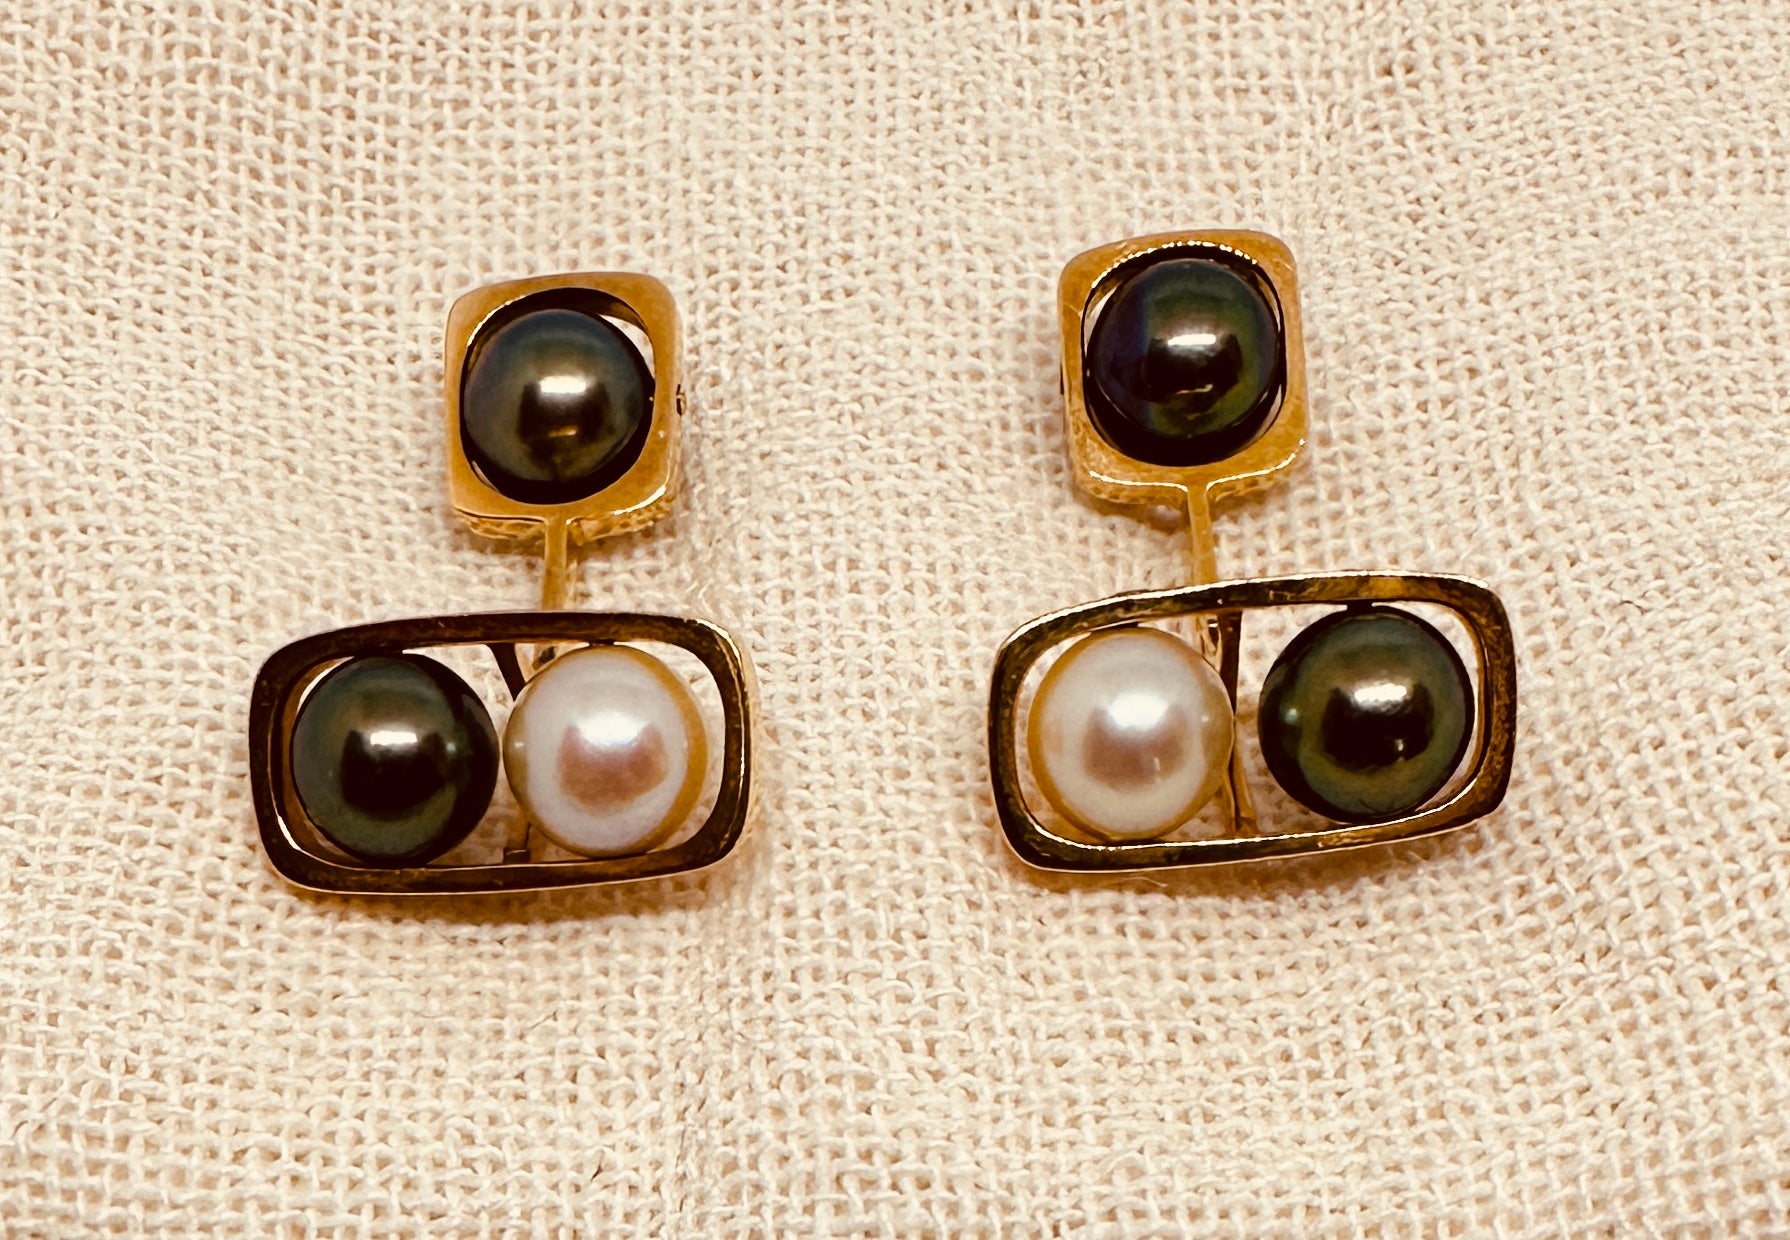 Superb cufflinks in 18K yellow gold with natural white and gray pearls by Jean Dinh Van for Pierre Cardin. For his very first commission after leaving Cartier, Dinh Van designed these 